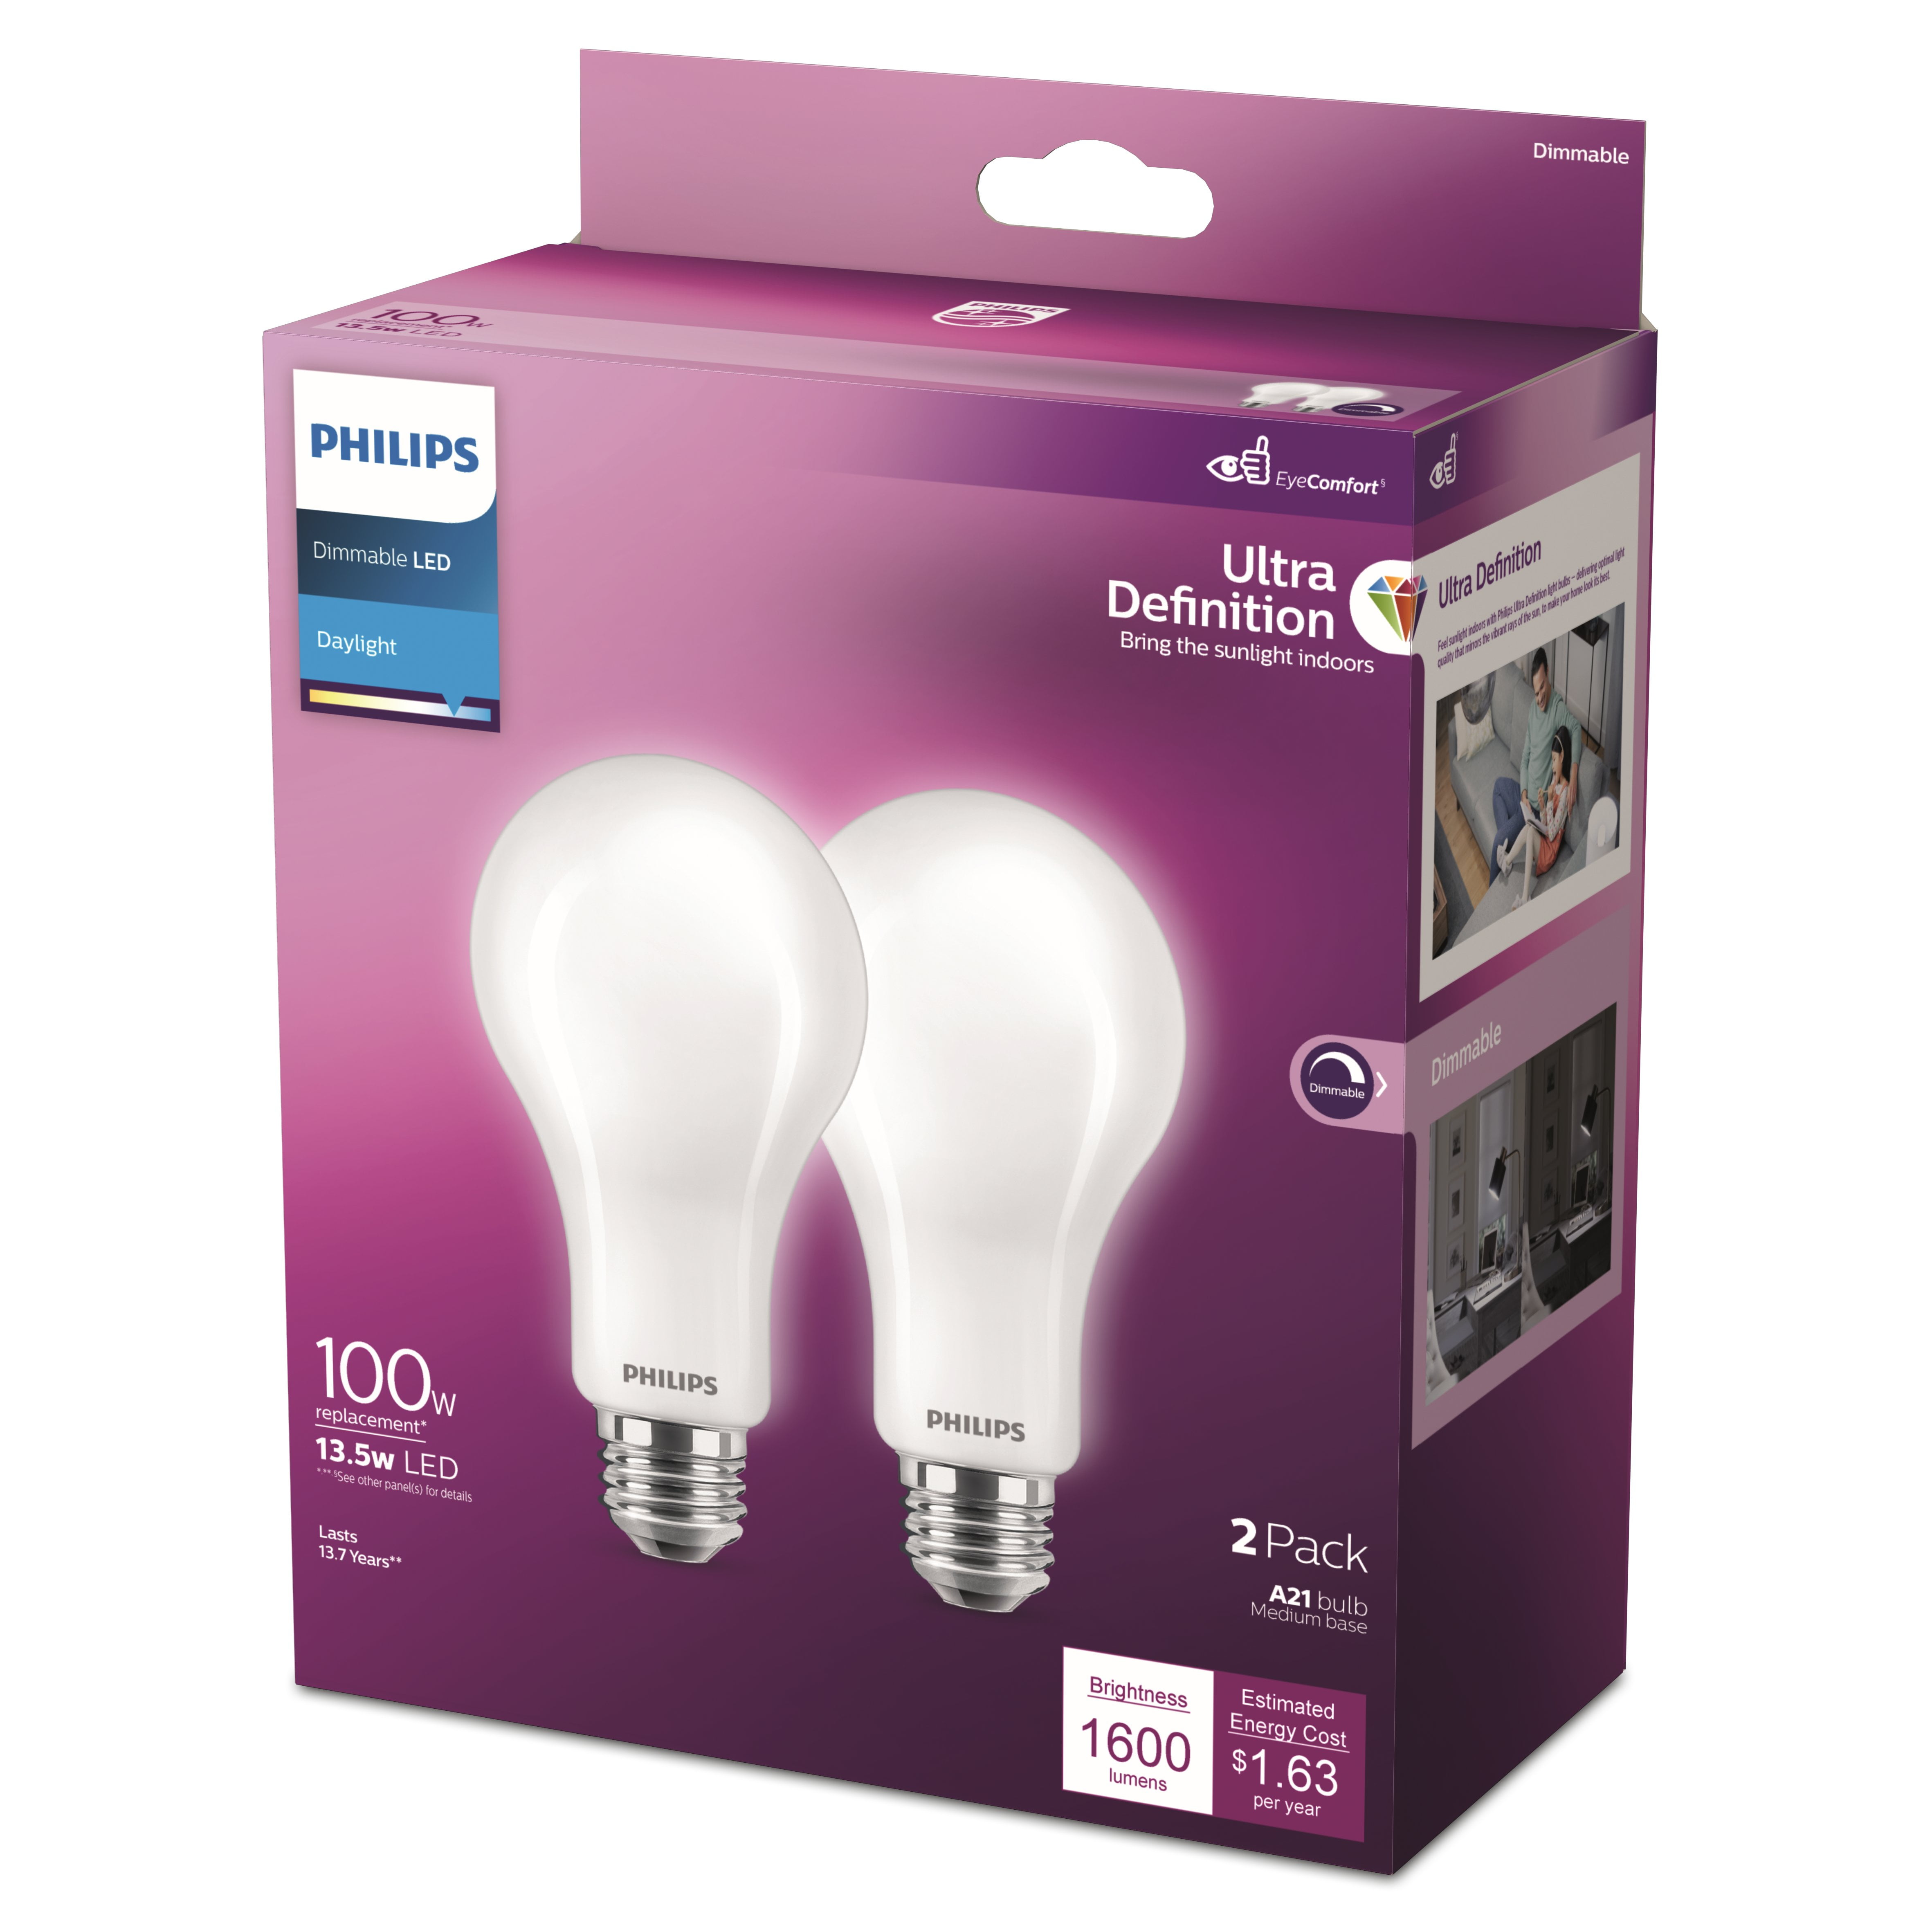 Philips Ultra Definition LED 100-Watt A21 Light Bulb, Frosted Daylight, Dimmable, E26 Base (2-Pack) - Walmart.com